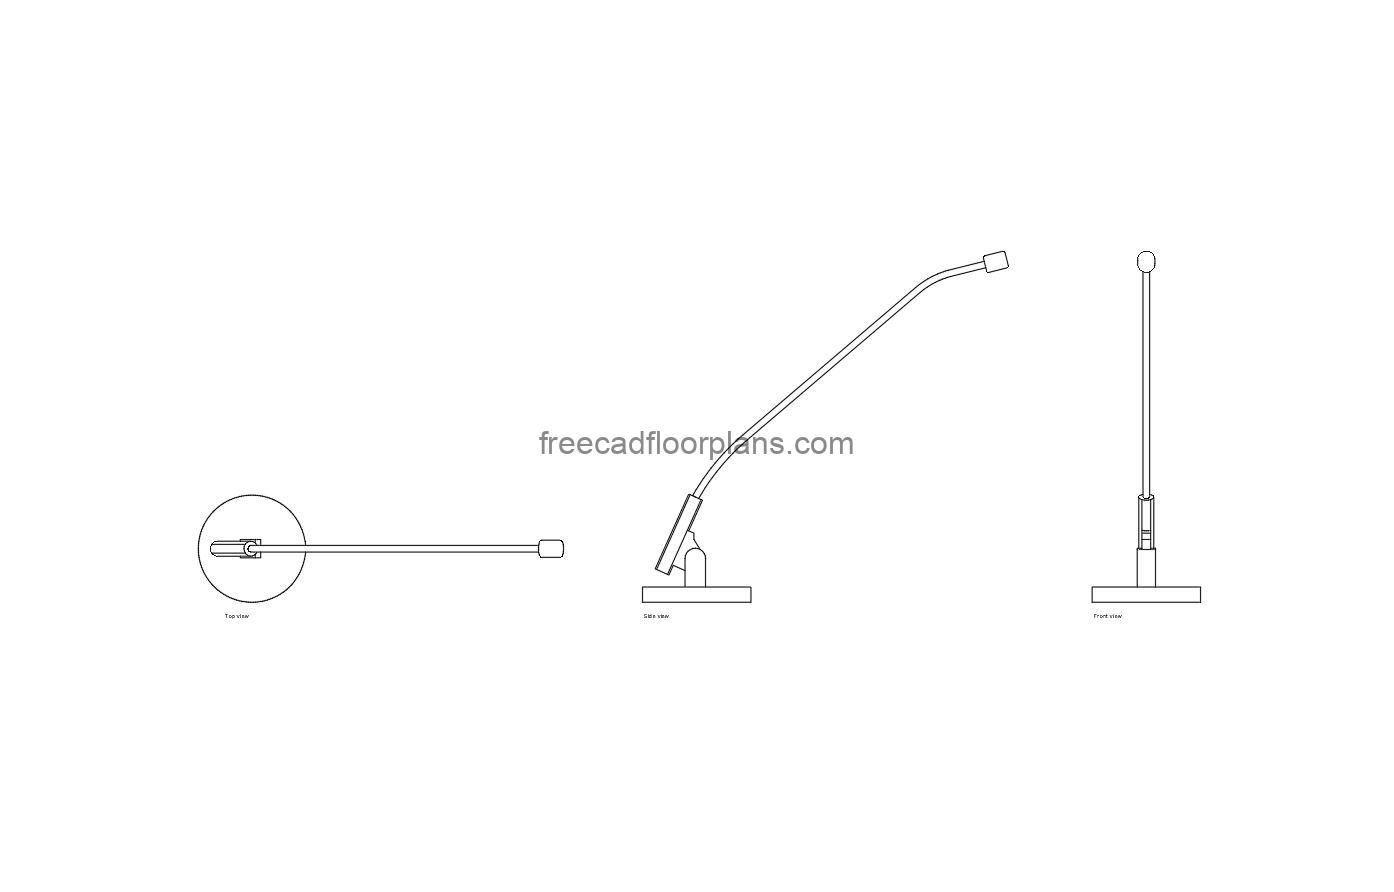 gooseneck microphone autocad drawing, plan and elevation 2d views, dwg file free for download